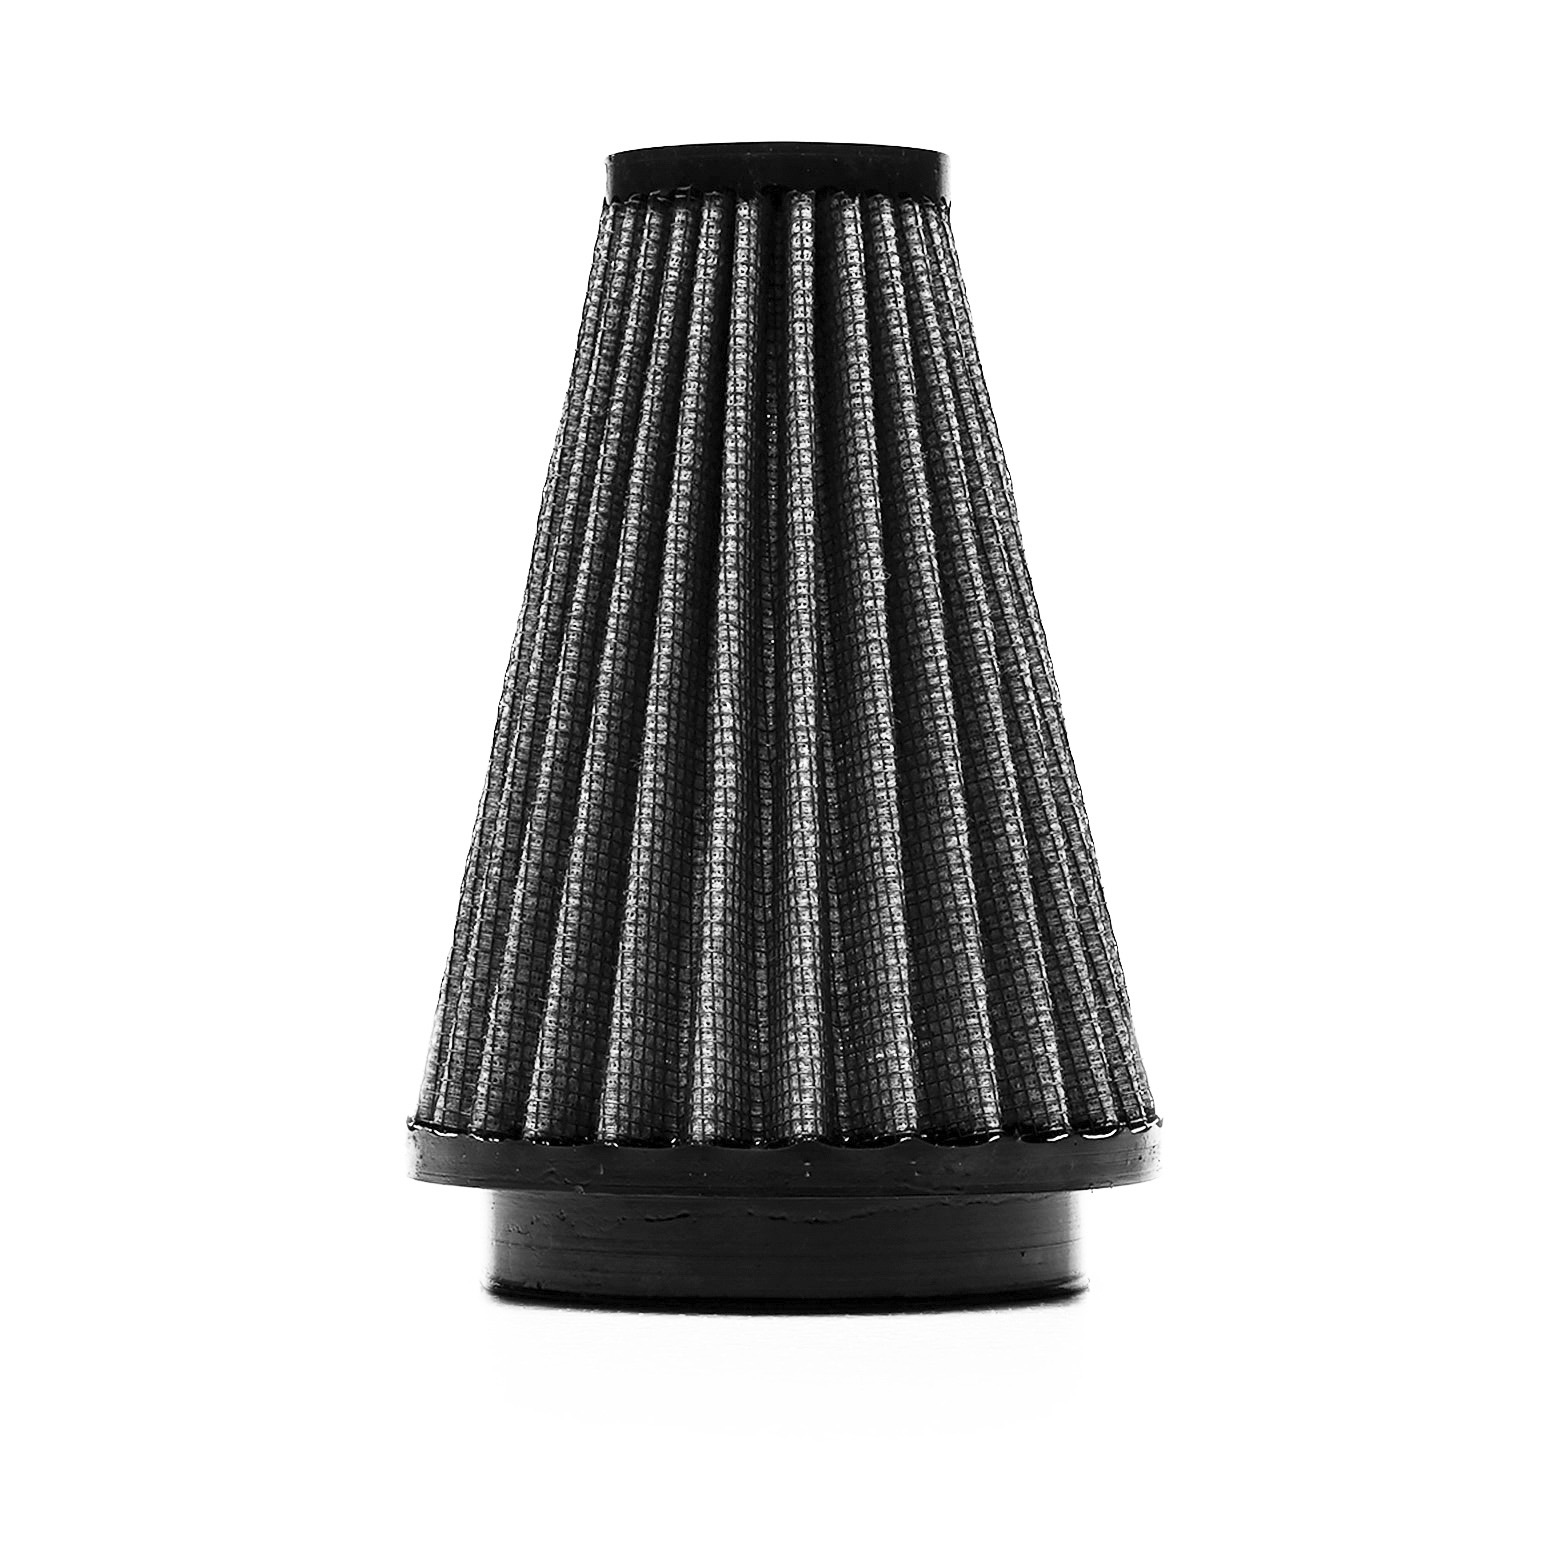 Ford Fiesta ST Intake Replacement Filter